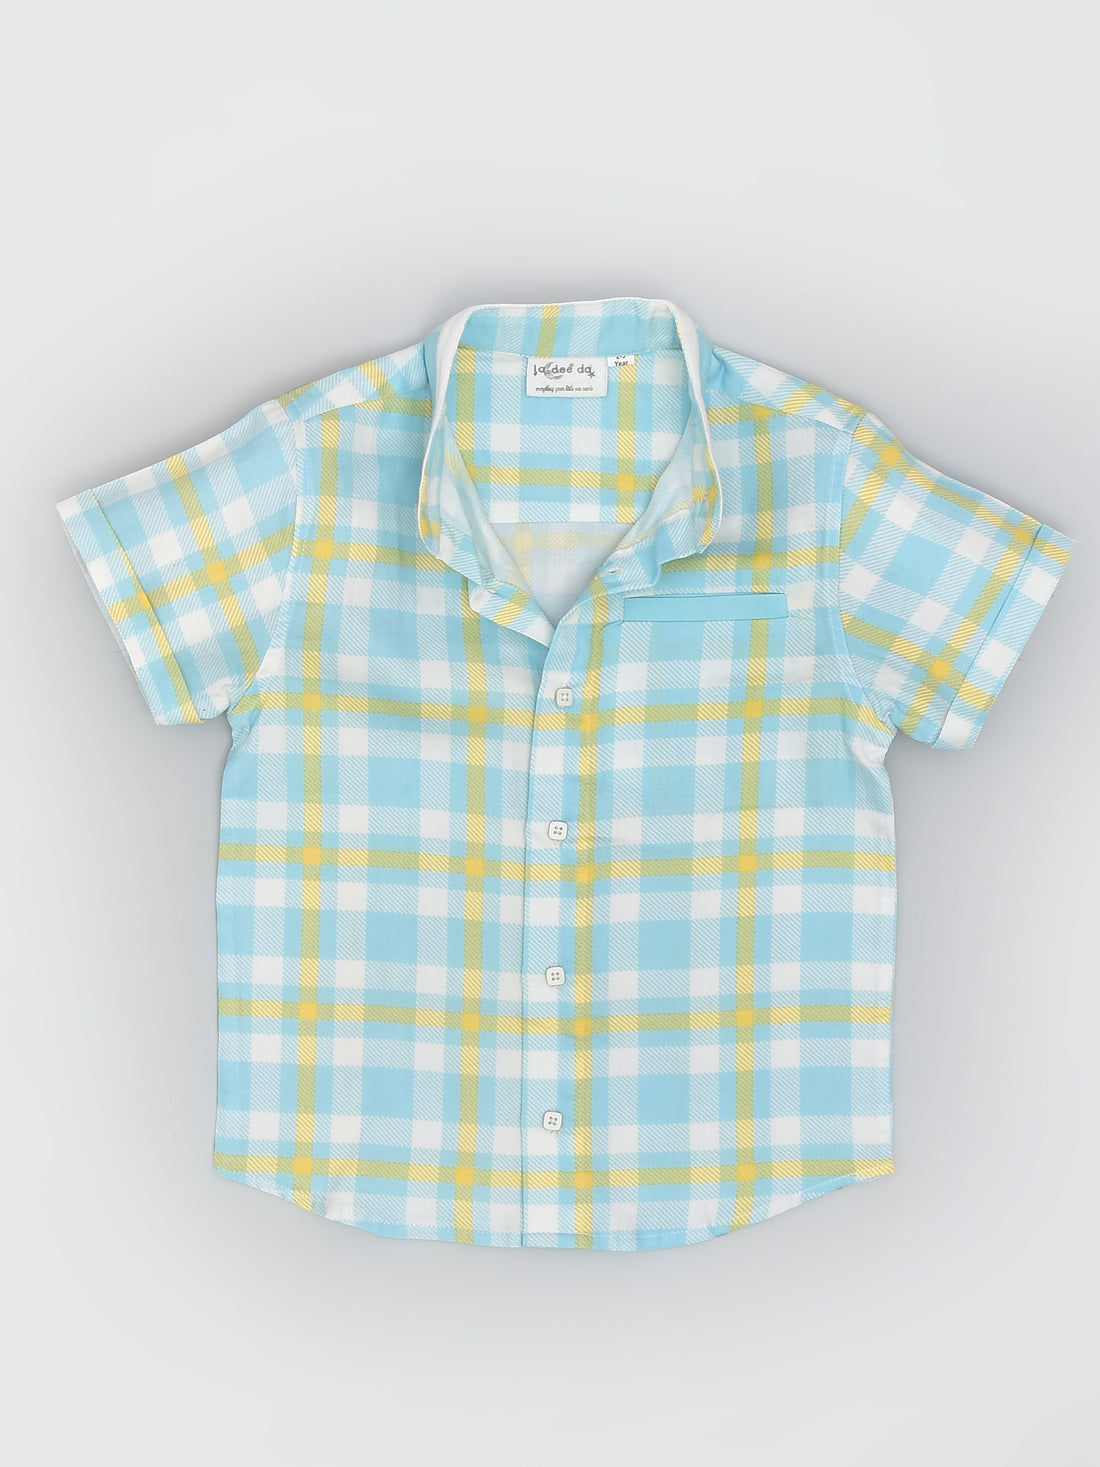 Cotton Half Sleeve Casual Shirt in Blue and Yellow Checks for Boys